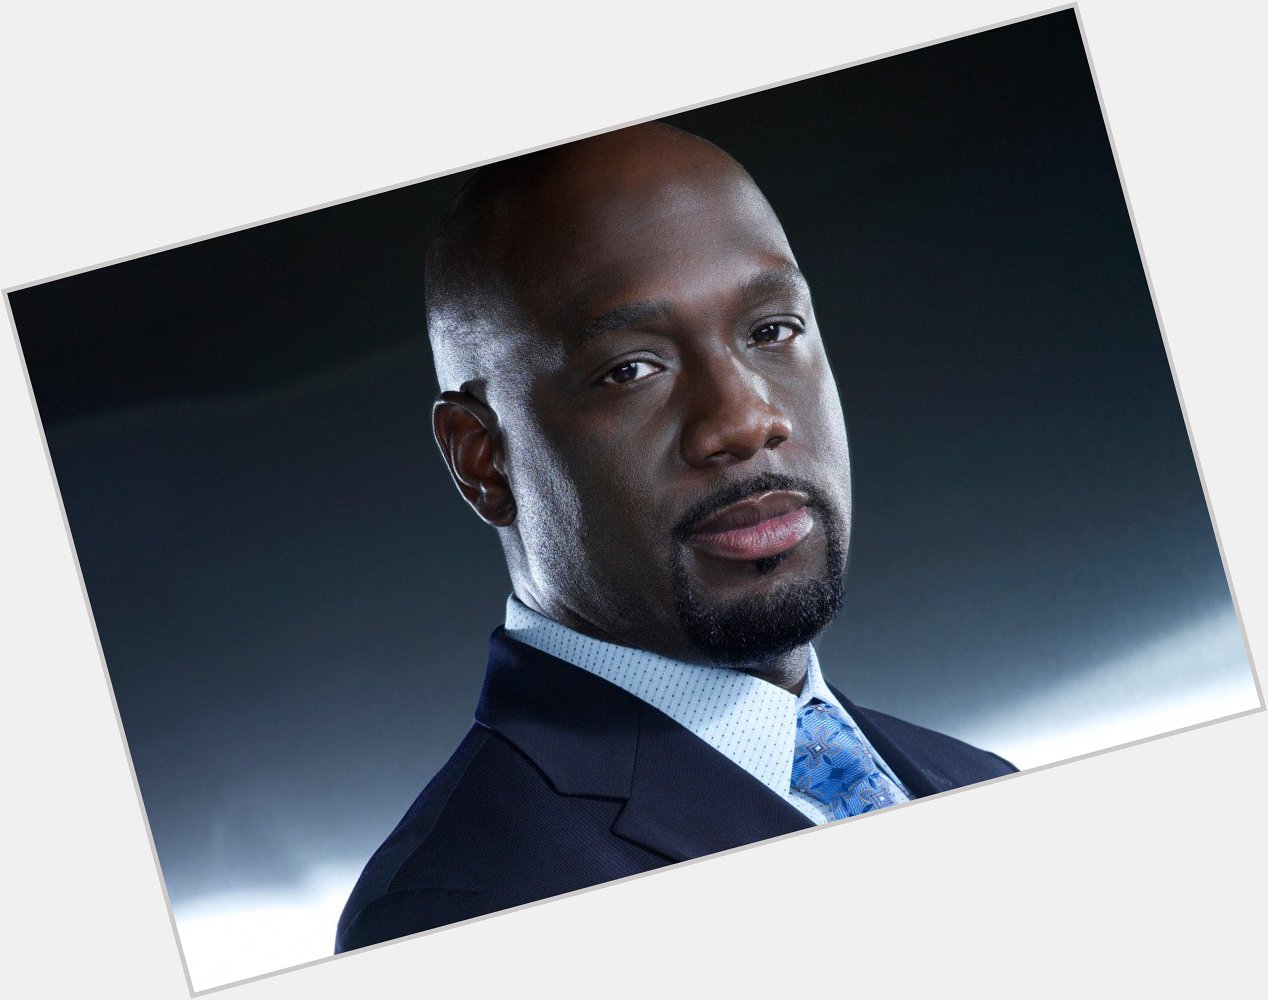 If it is your birthday today happy birthday to you. You share it with Hollywood actor Richard T. Jones 